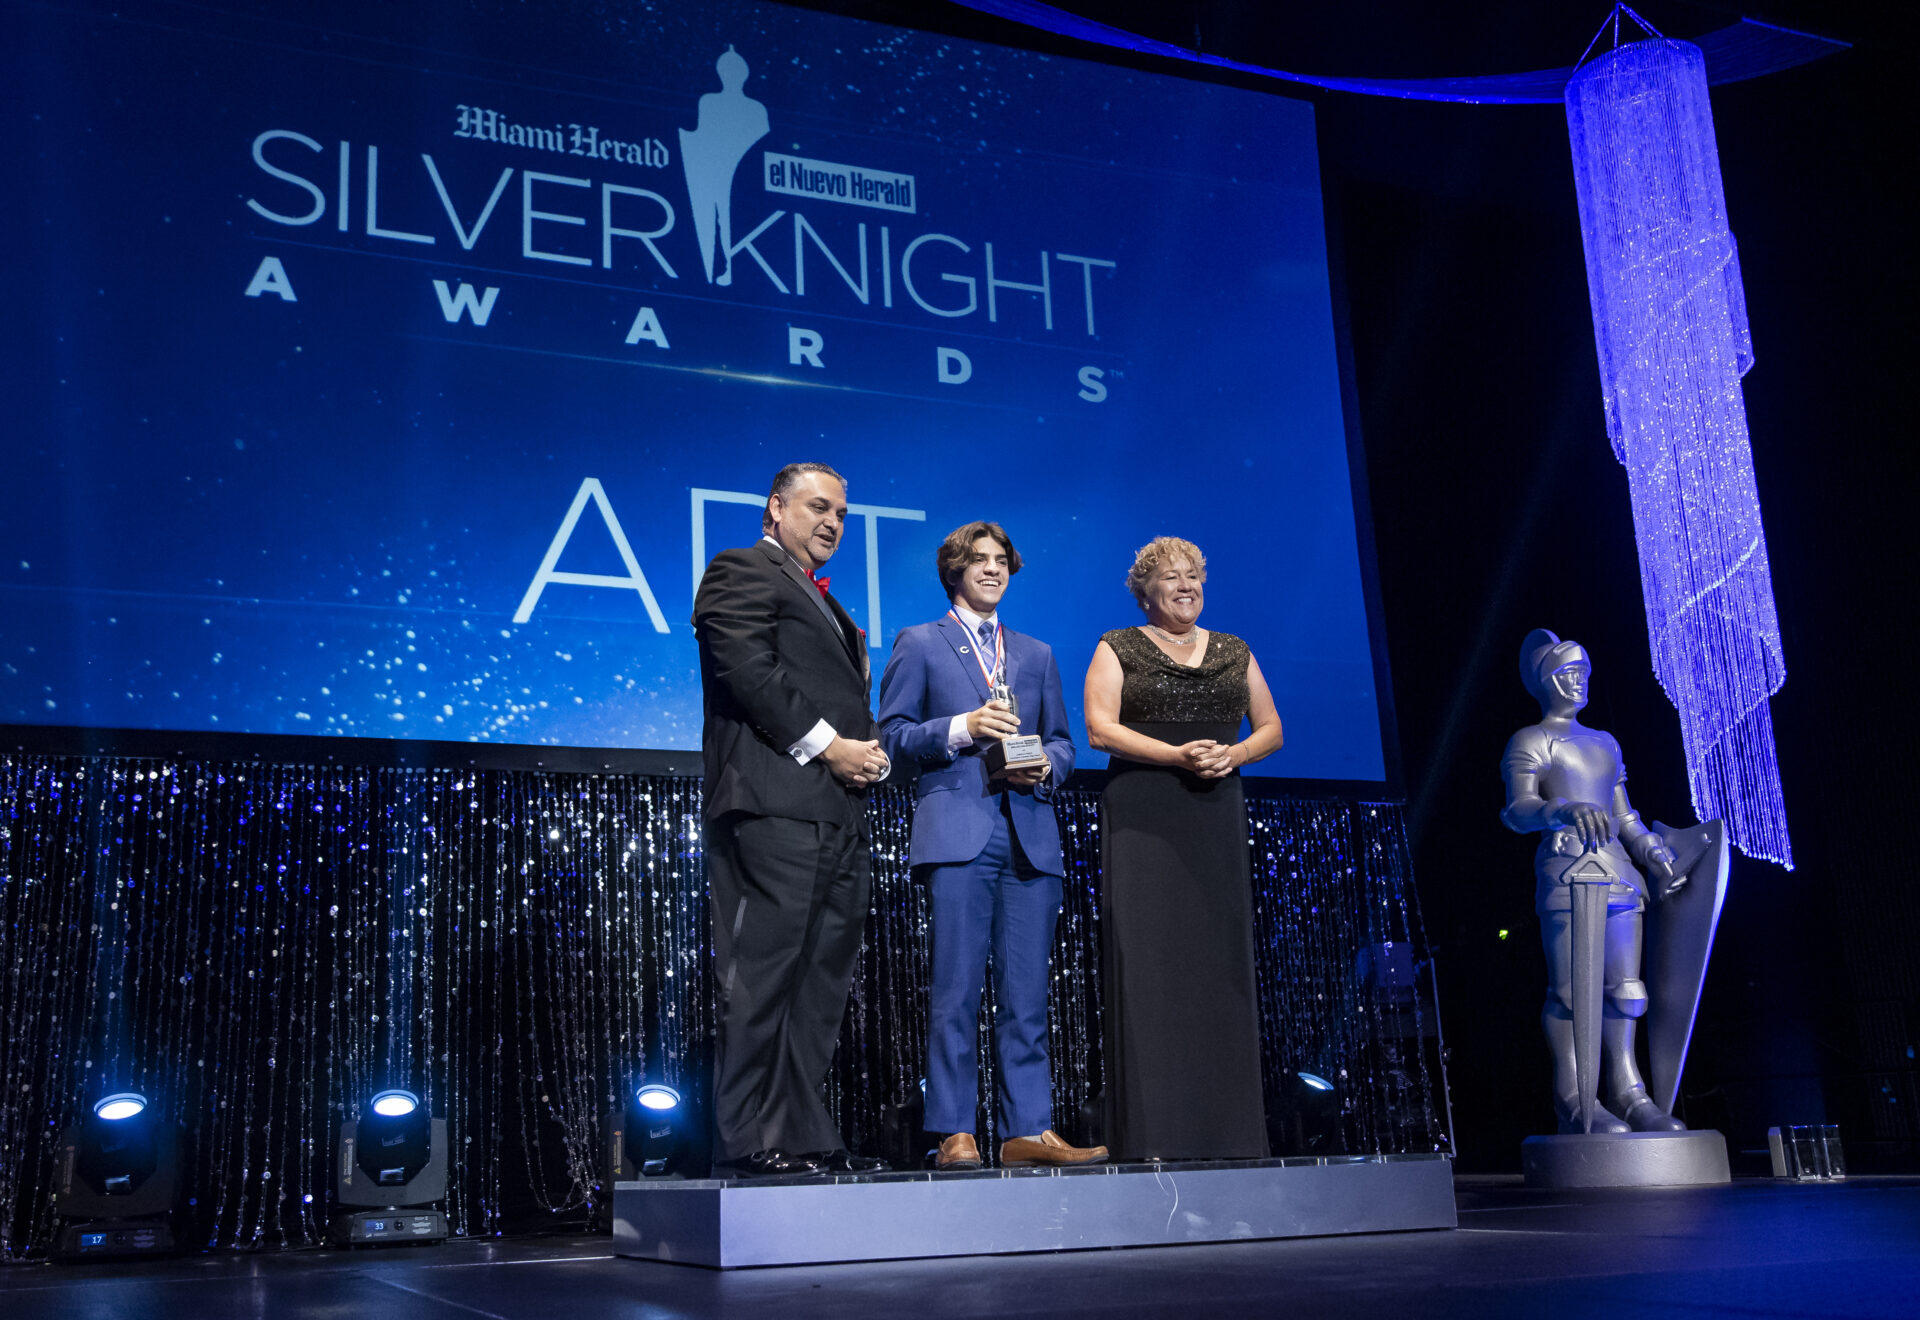 FUTURE OF THE ARTS IN GOOD HANDS WITH SILVER KNIGHT AWARD WINNERS